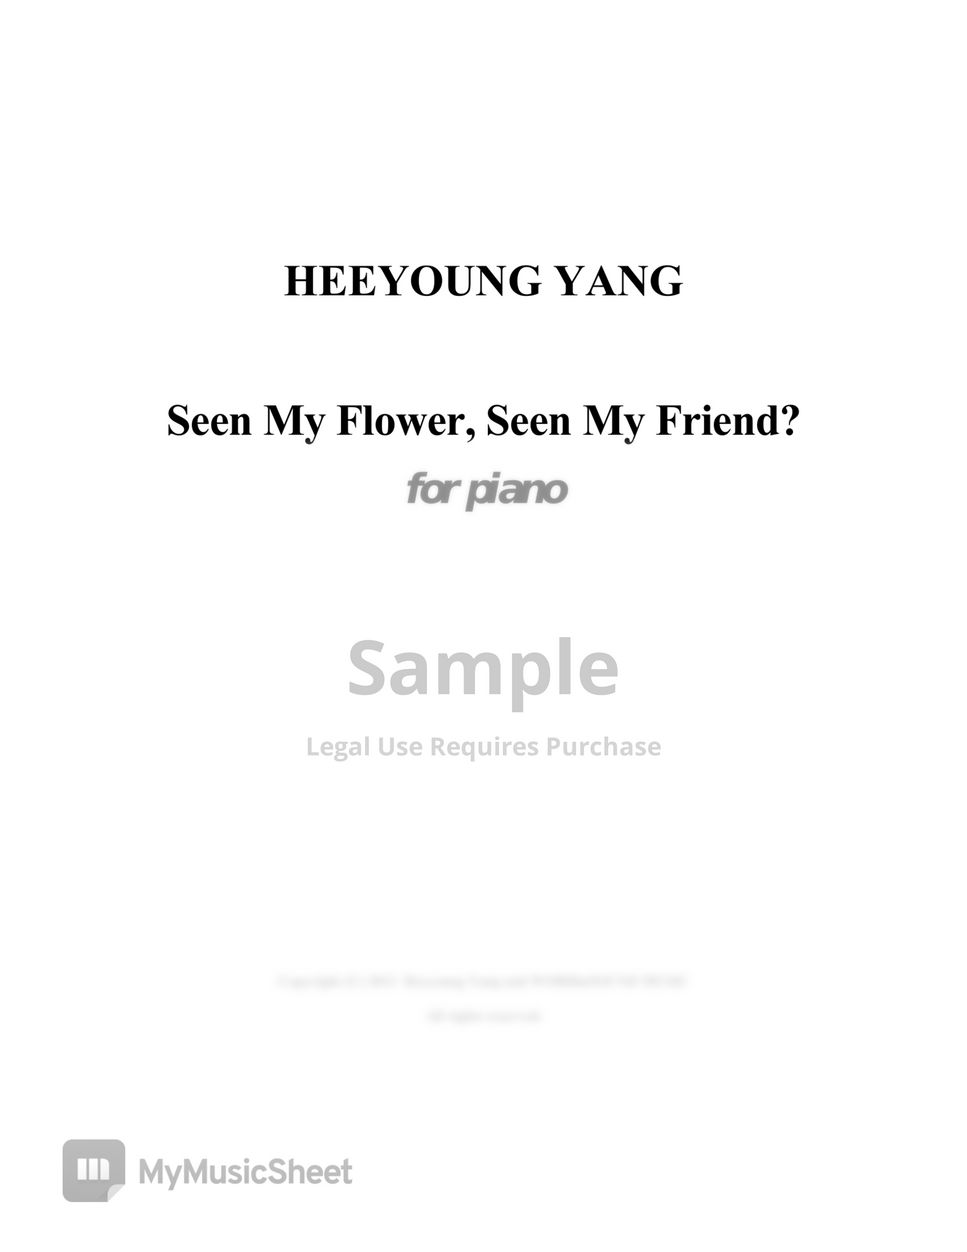 Heeyoung Yang - Seen My Flower, Seen My Friend? for piano (우리집에 왜 왔니?) by Heeyoung Yang